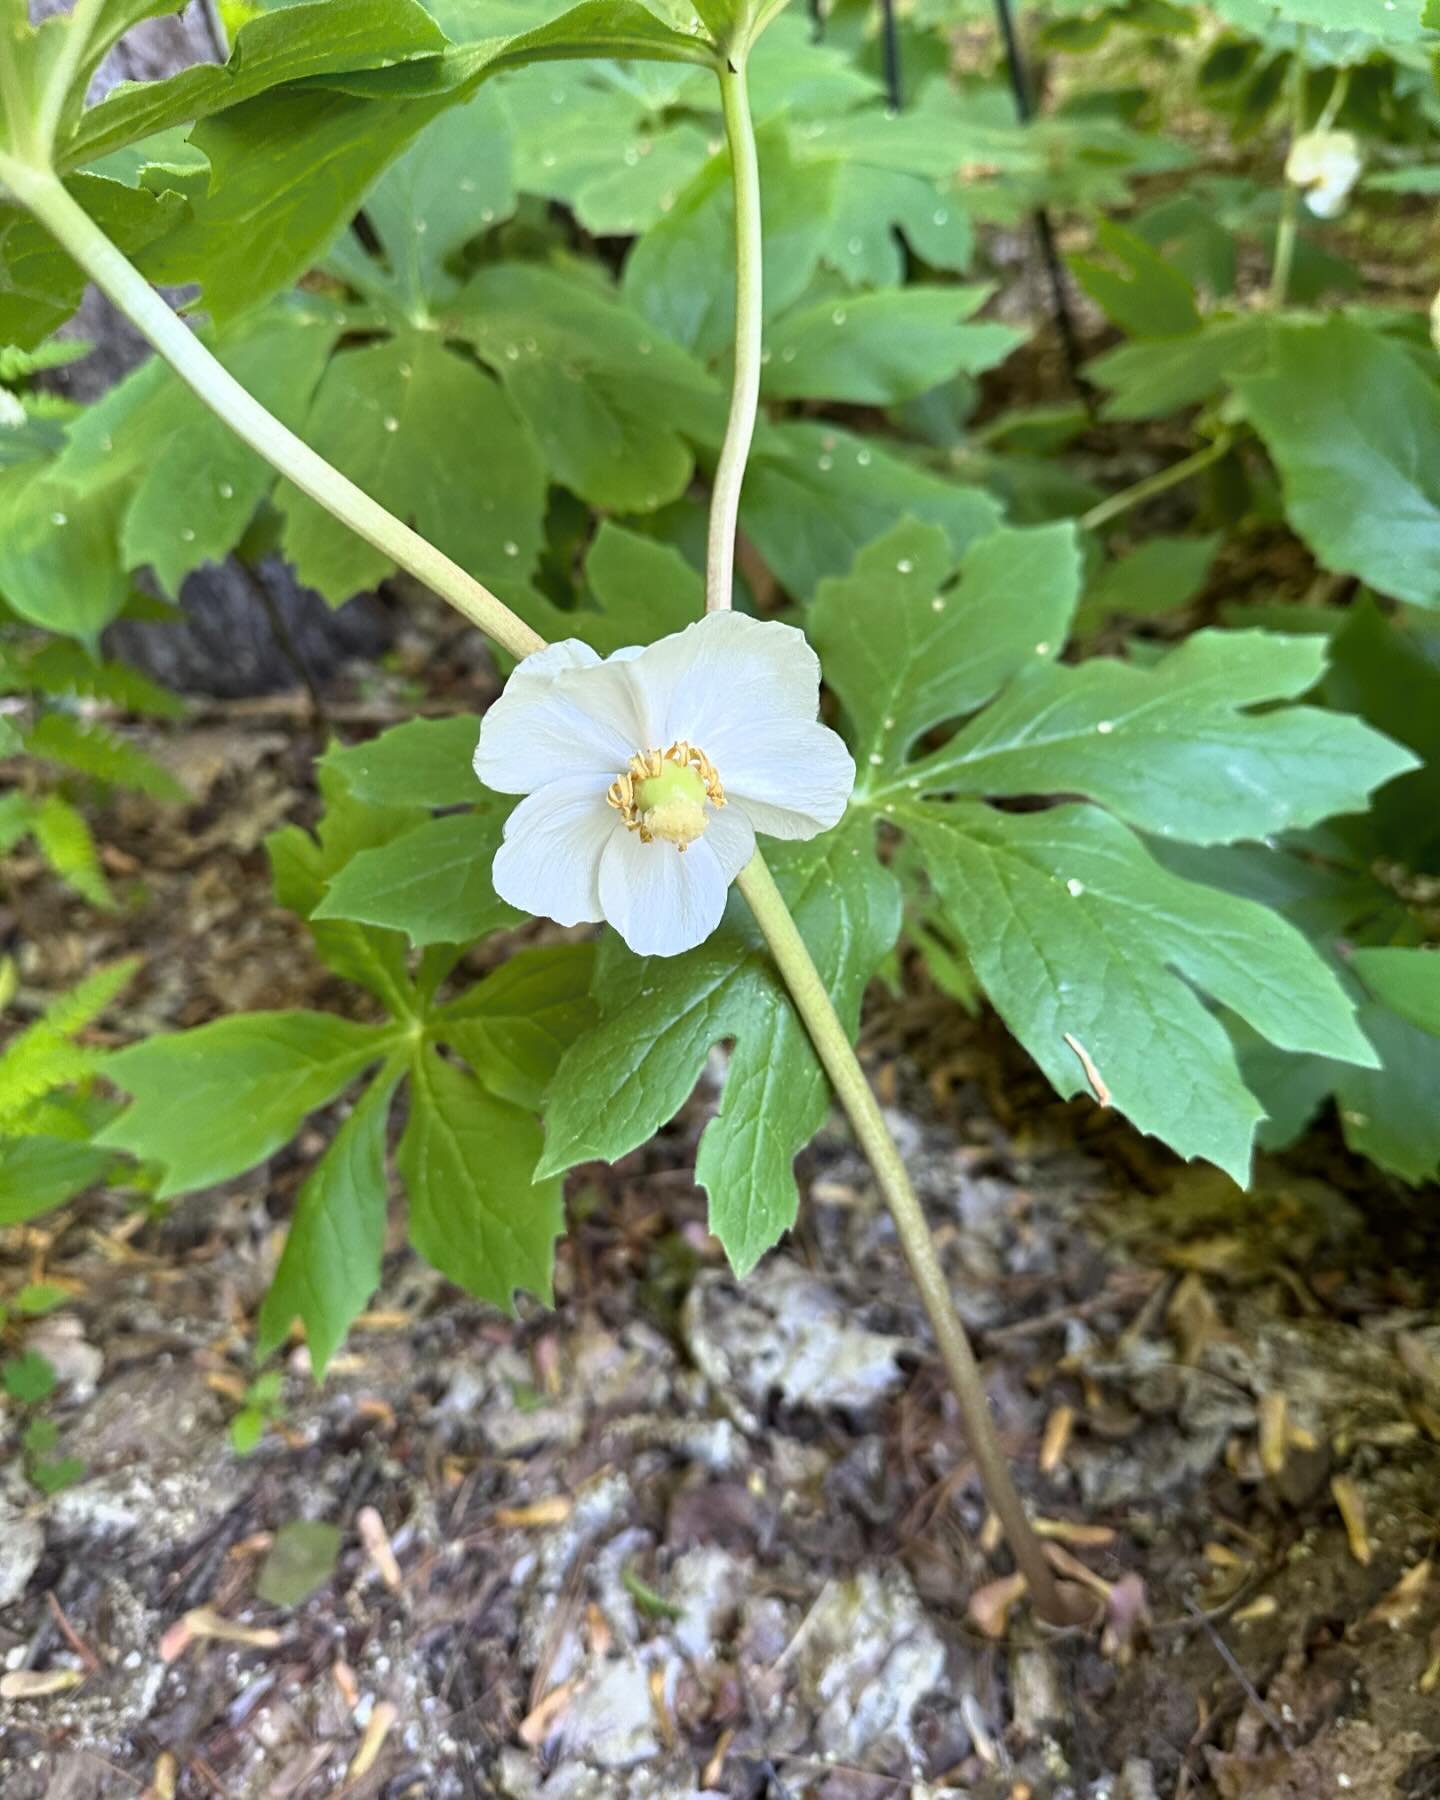 Mayapple leaves are large&mdash;up to 16 inches across&mdash;and lobed.  The leaves are reminiscent of a beach umbrella, especially if observed from emergence to the complete unfurling of the leaves.  Leaves emerge with a white sheath covering which 